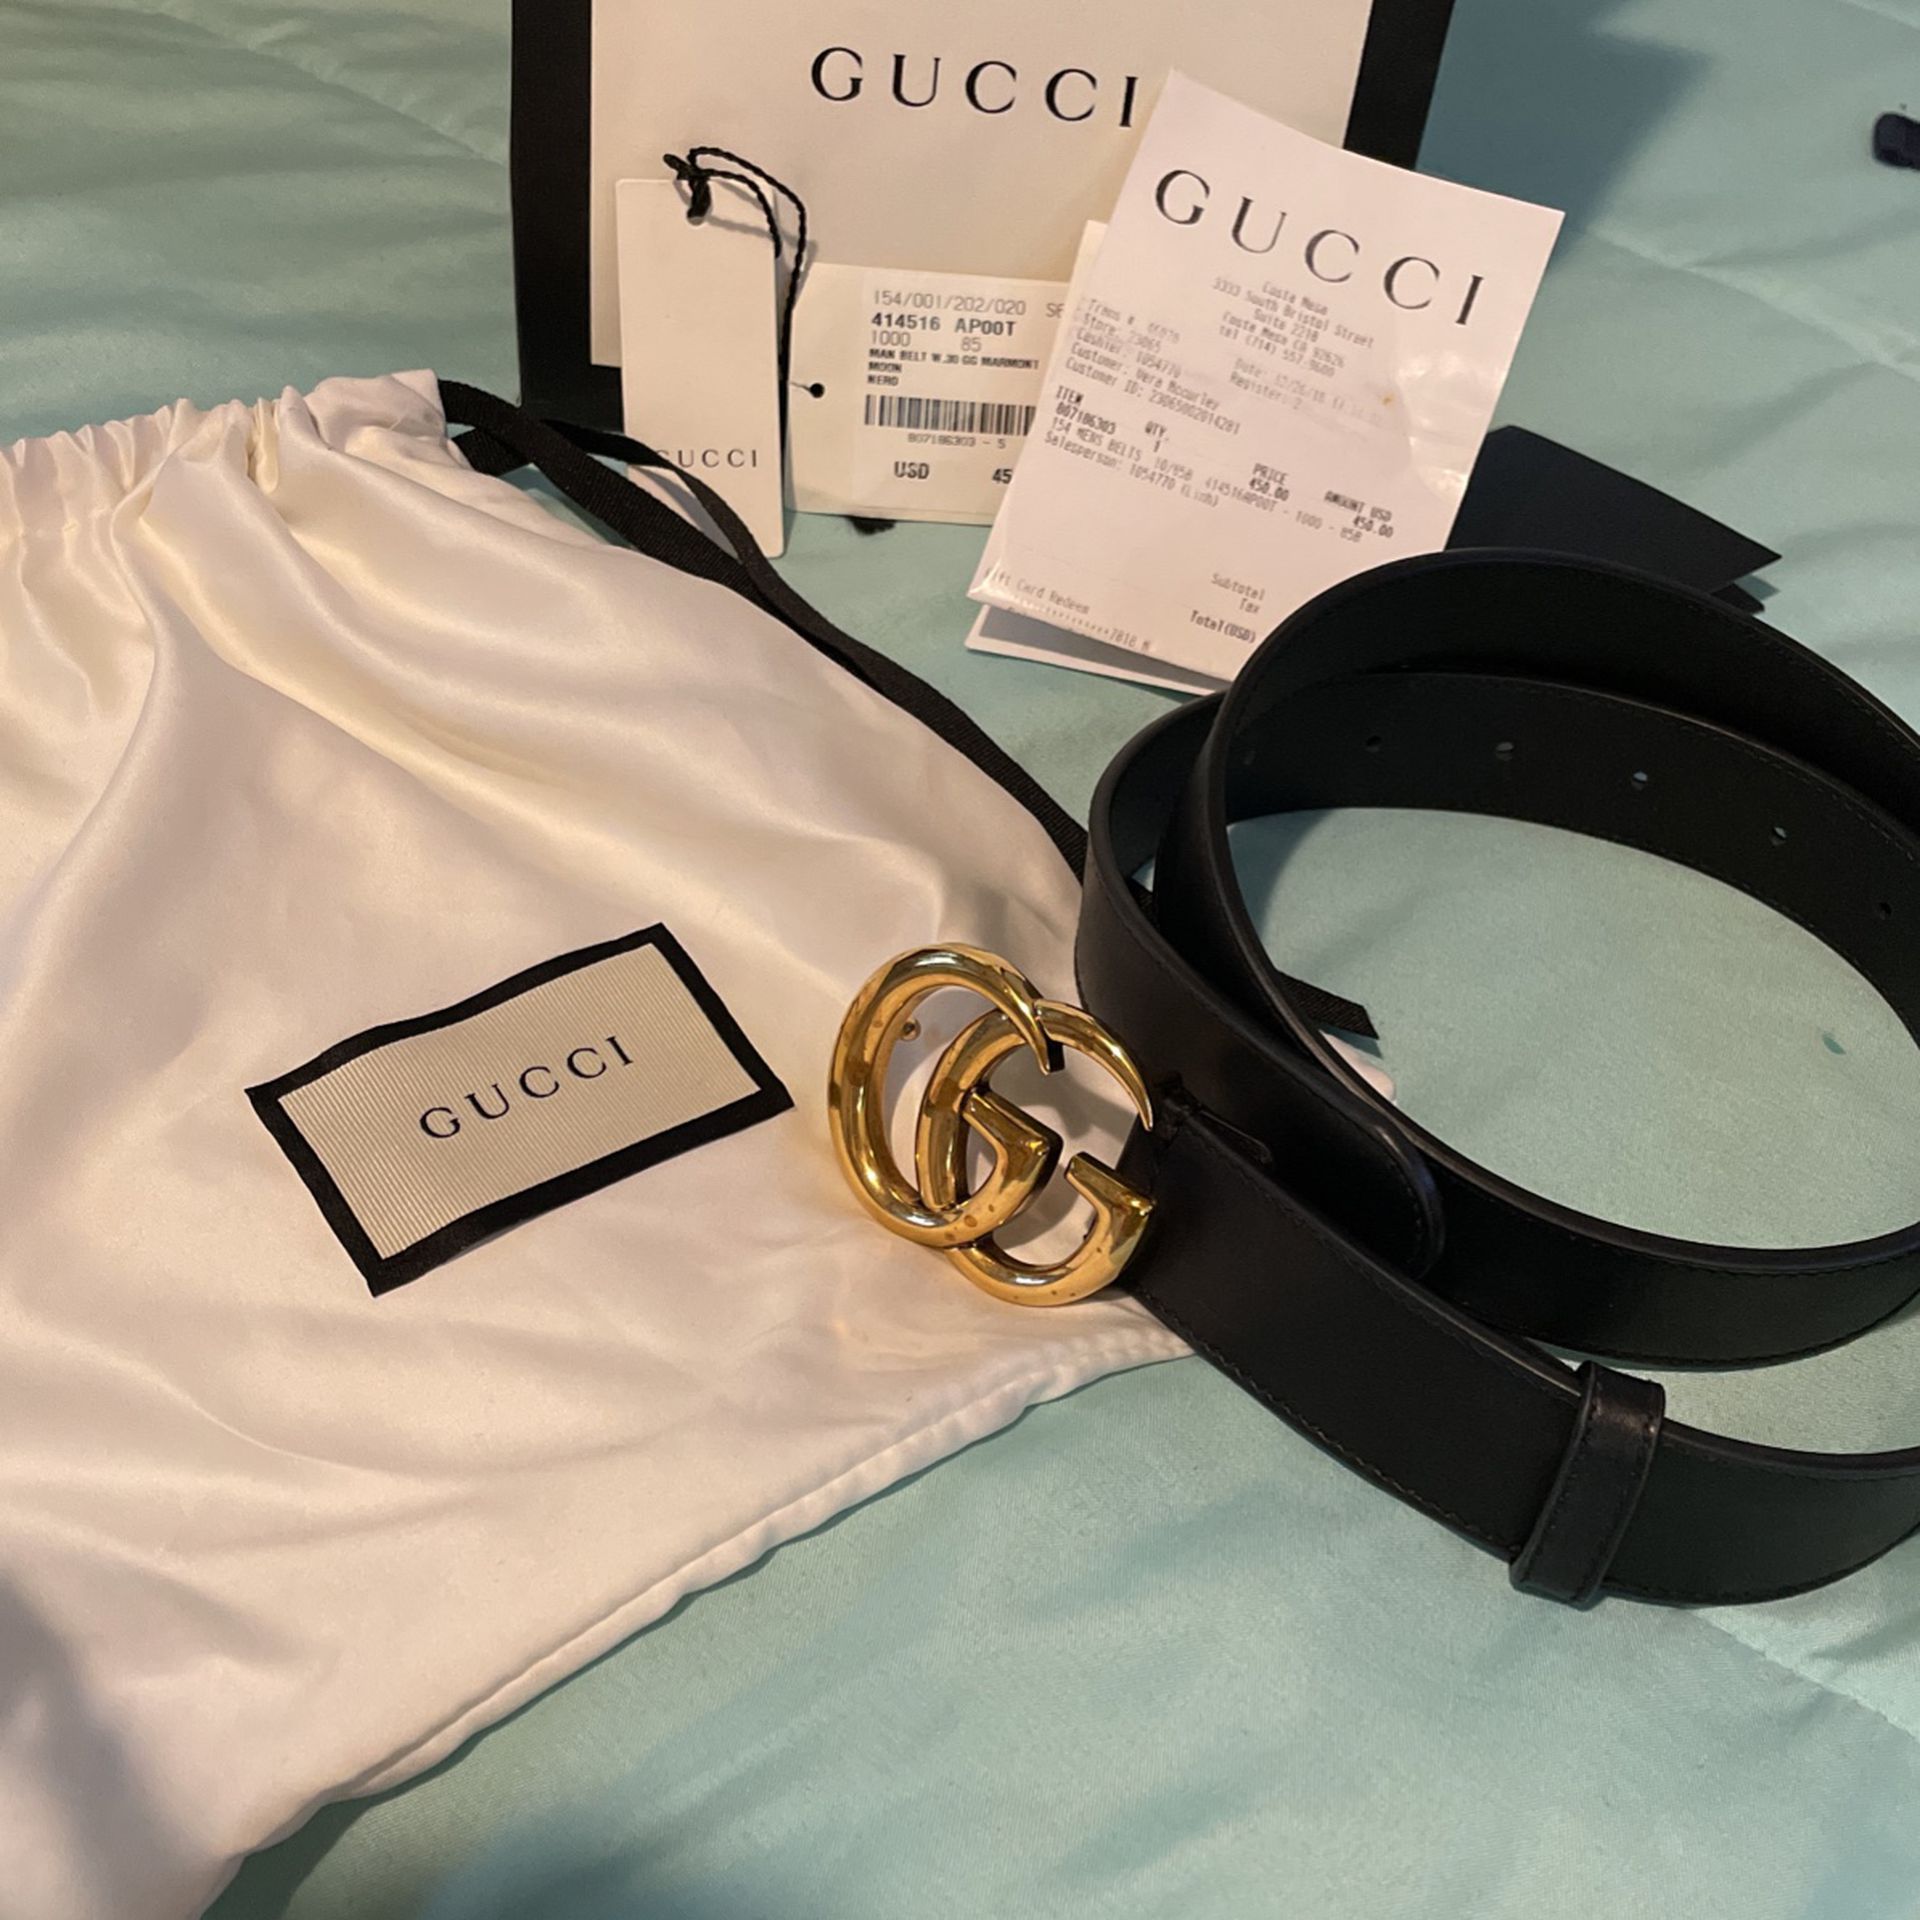 Authentic Gucci belt Purchased from Gucci in South Coast Plaza receipt and tags included